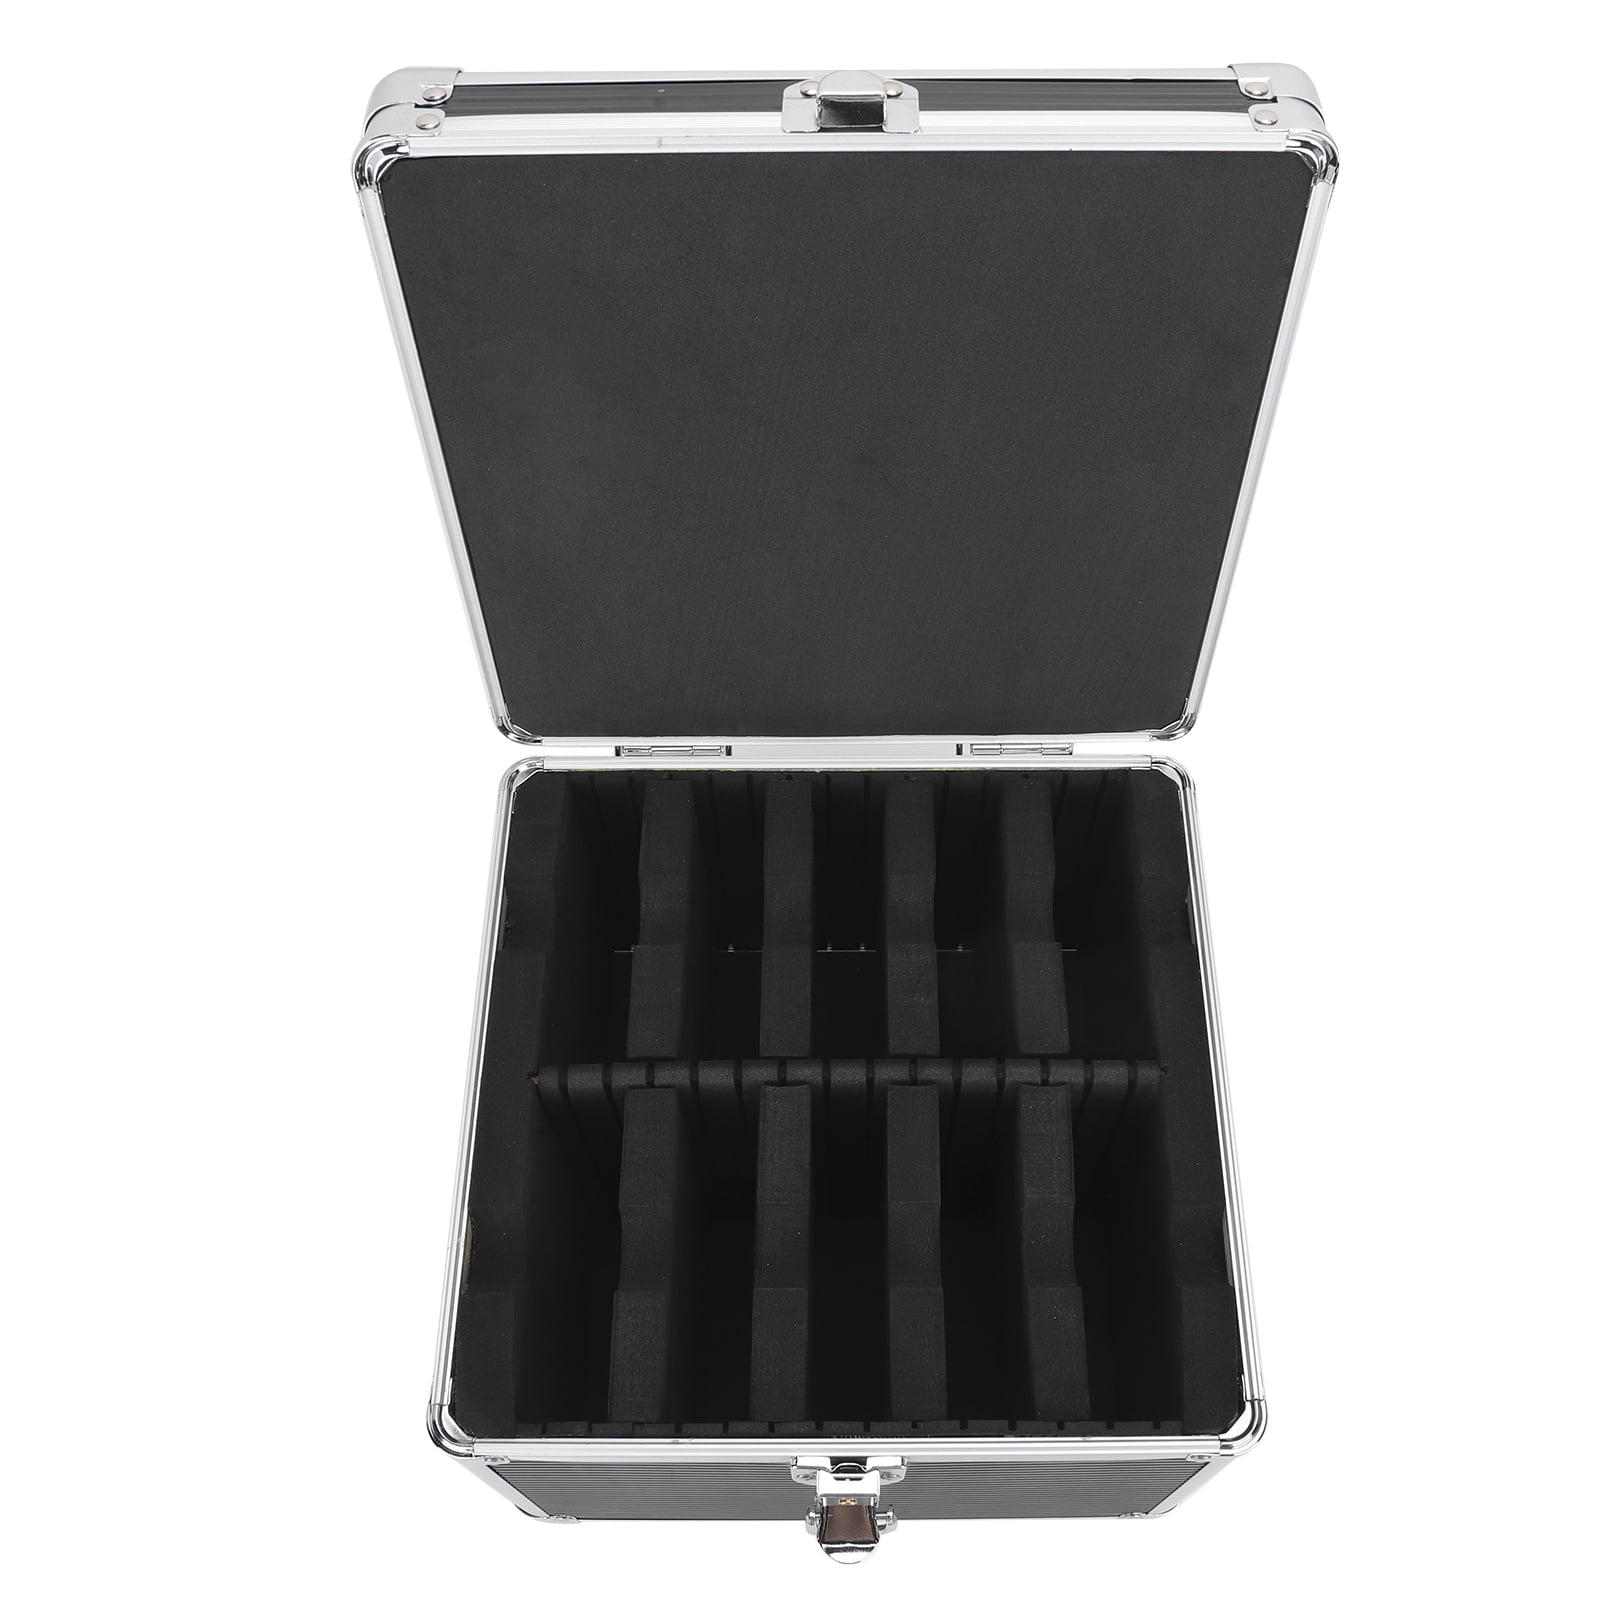 2.5 3.5 IDE SATA HDD Aluminum & EVA Protection Suitcase，Suitcase for 8 x 3.5 & 6 x 2.5 inch Hard Drive 